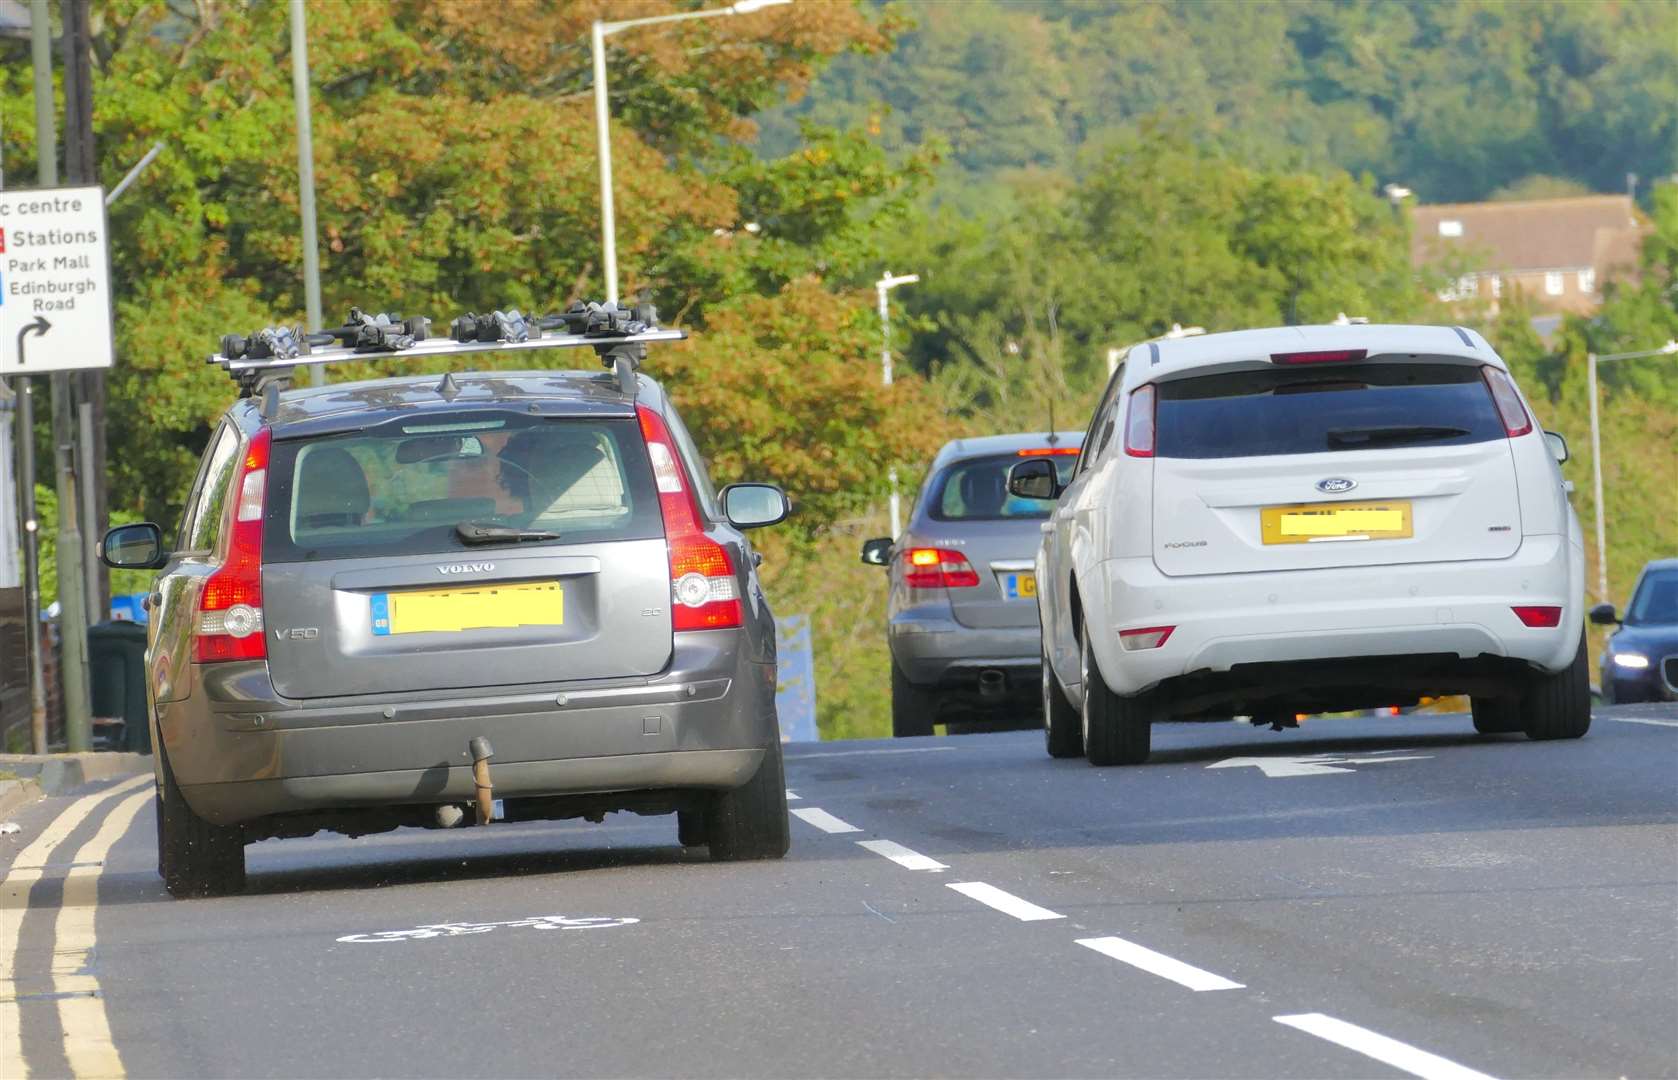 Drivers were spotted using the cycle lanes. Picture: Andy Clark